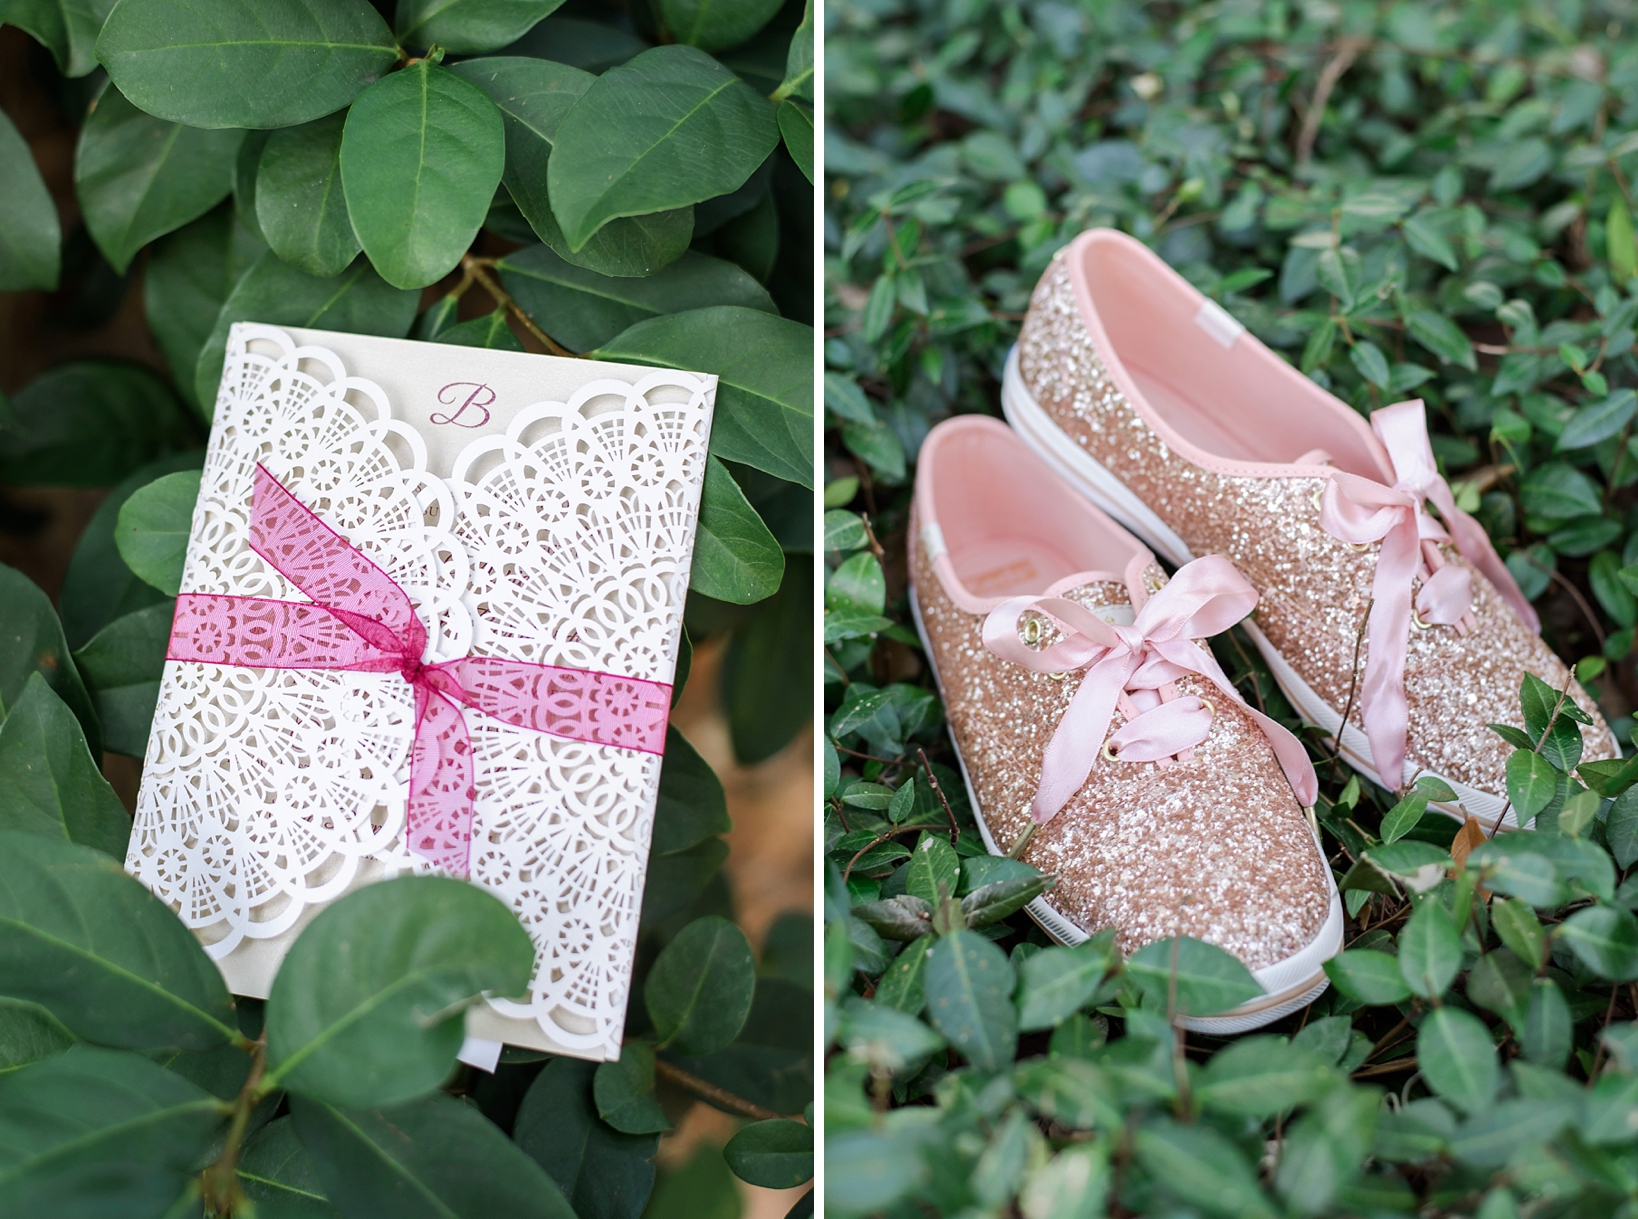 Wedding invitation and Kate Spade shoes in greenery